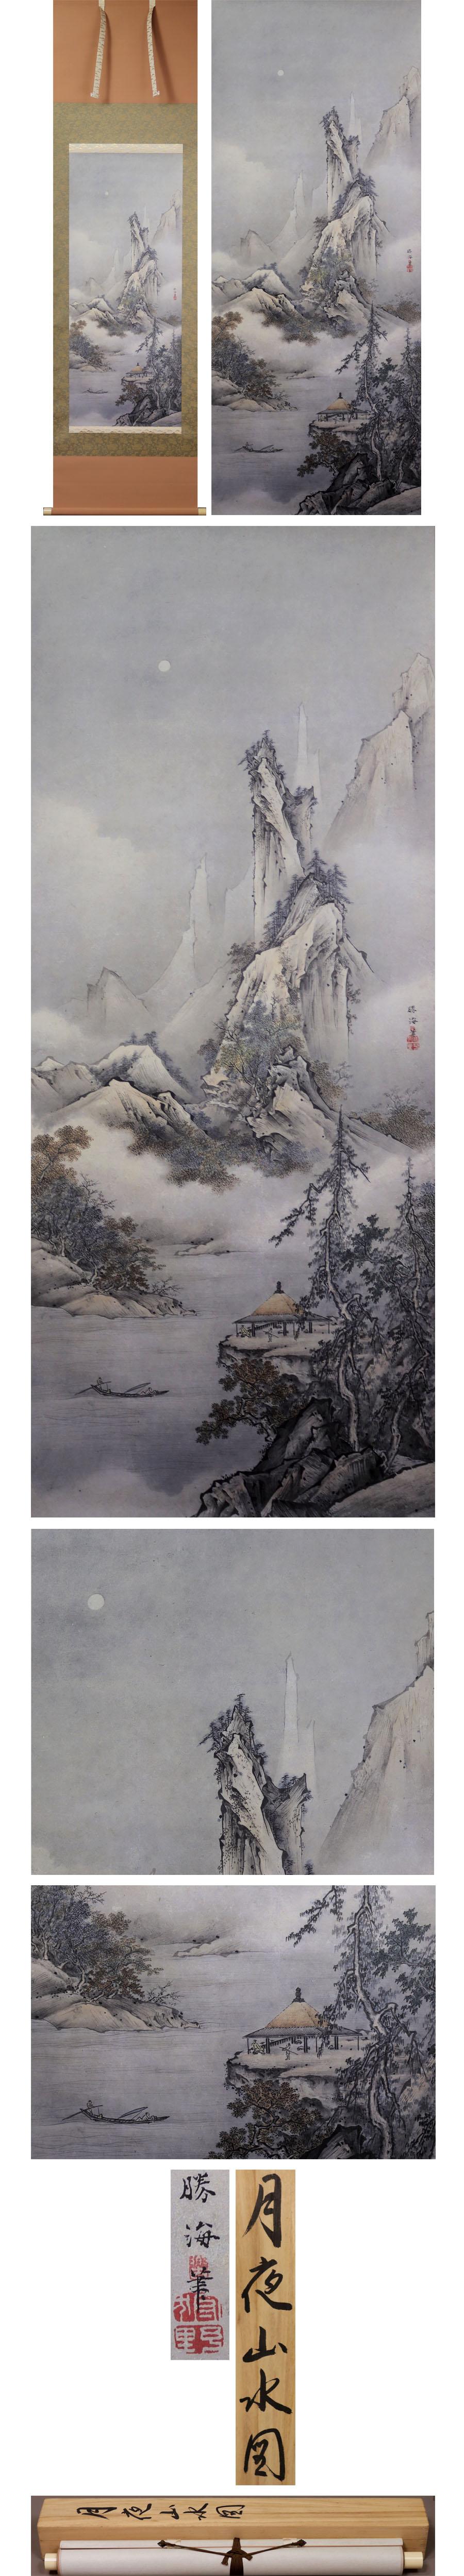 Japanese Painting Meiji Period Scroll by Kano Hogai Landscape a Luxury Craft  In Good Condition For Sale In Amsterdam, Noord Holland